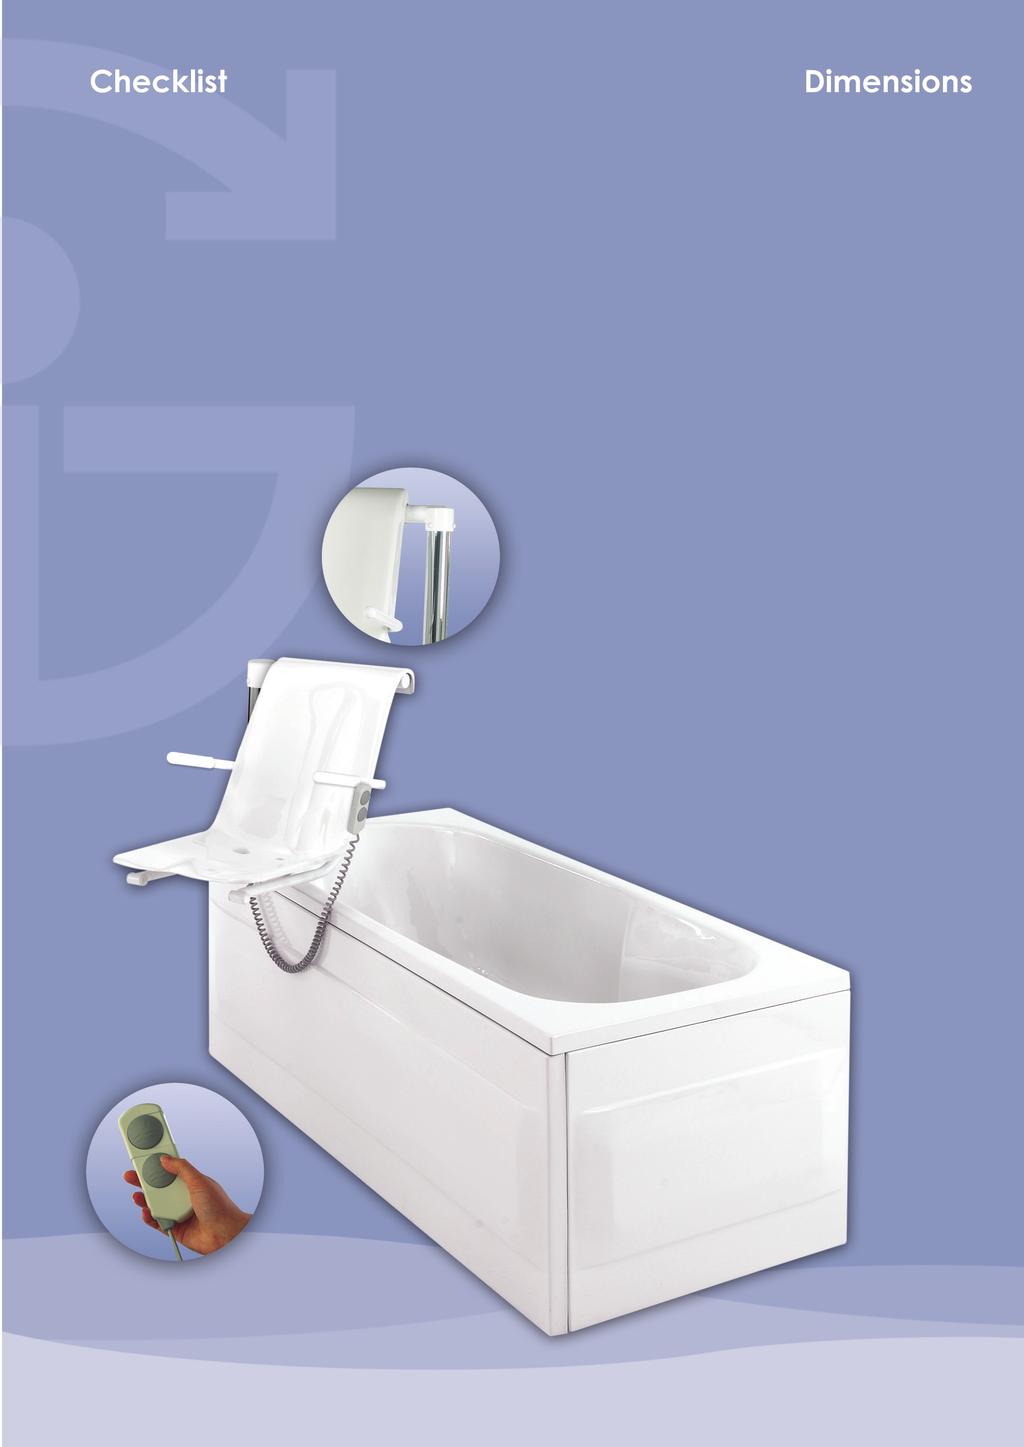 1500mm and 1700mm length baths available Battery back-up as standard 24 stone (150kg) lifting capacity Smooth easy clean surfaces Choice of folding armrests Extra deep bathing depth